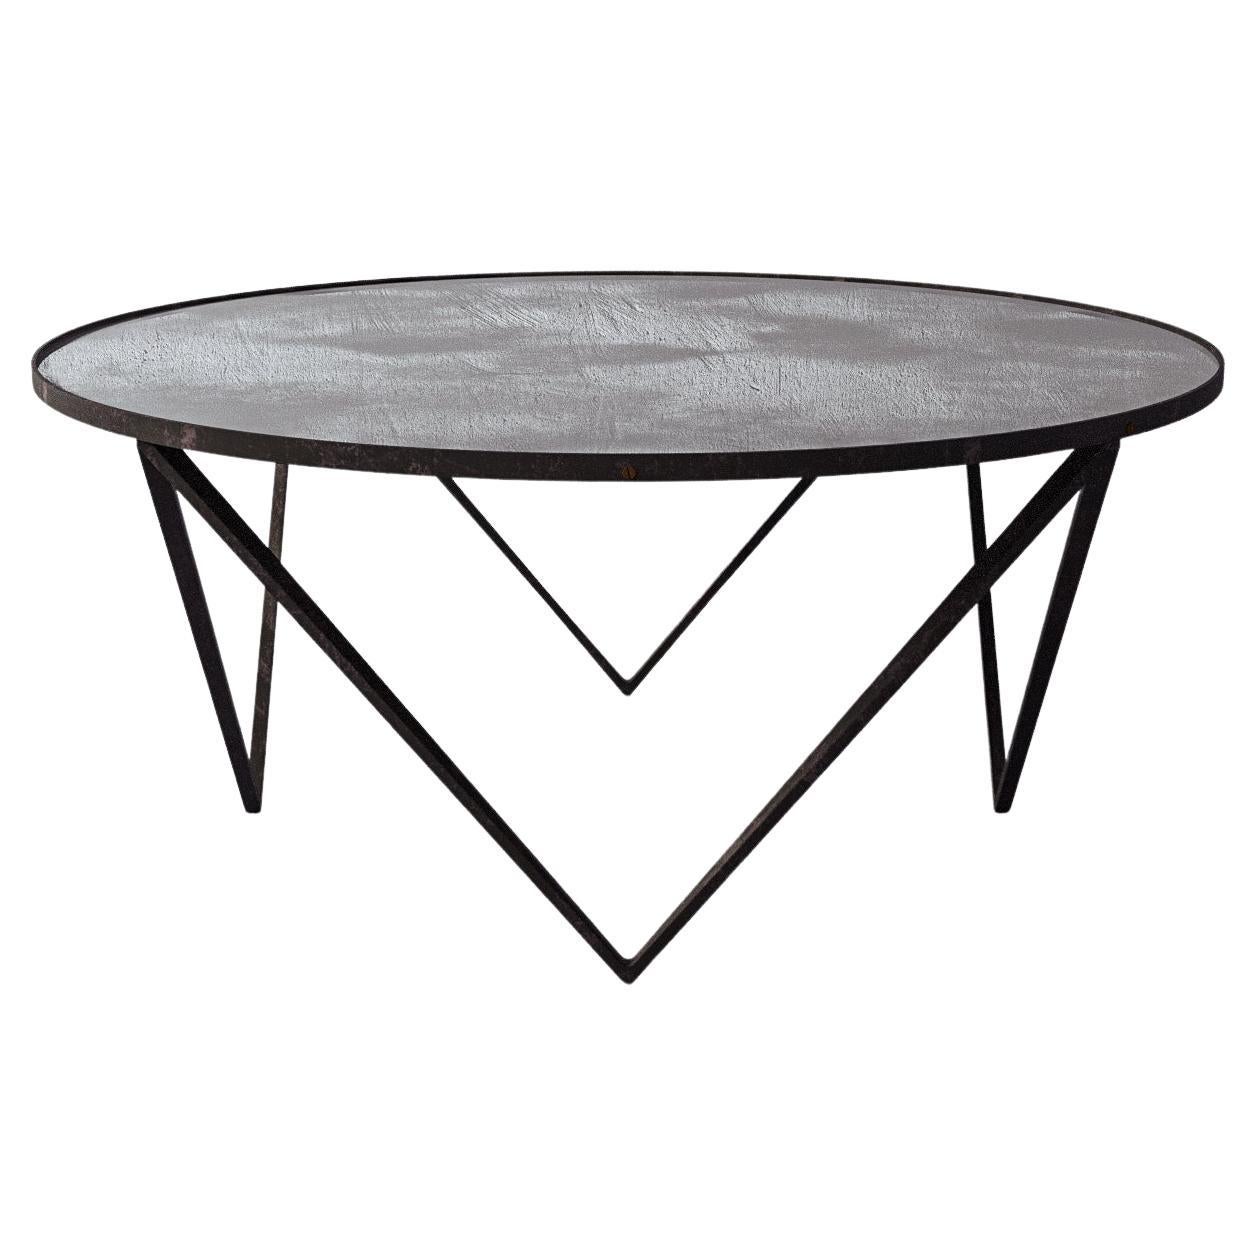 "Audin" Architectural, Antique Mirrored Cocktail Table by Christiane Lemieux For Sale